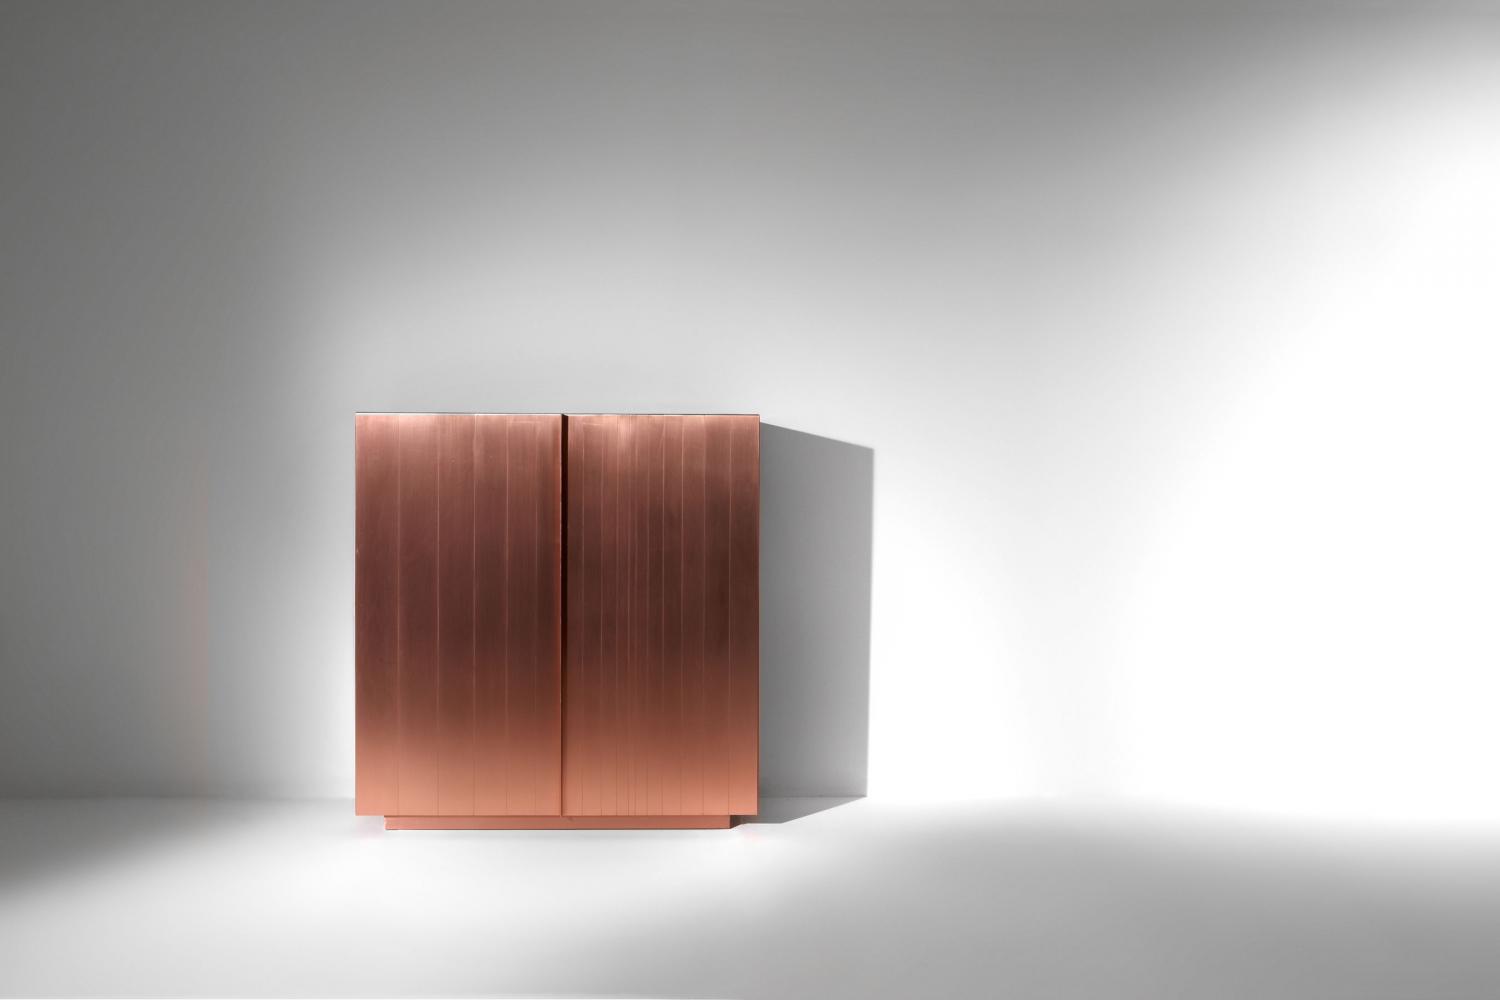 ST 01 Luxury high sideboard clad in brass, copper, iron or stainless steel